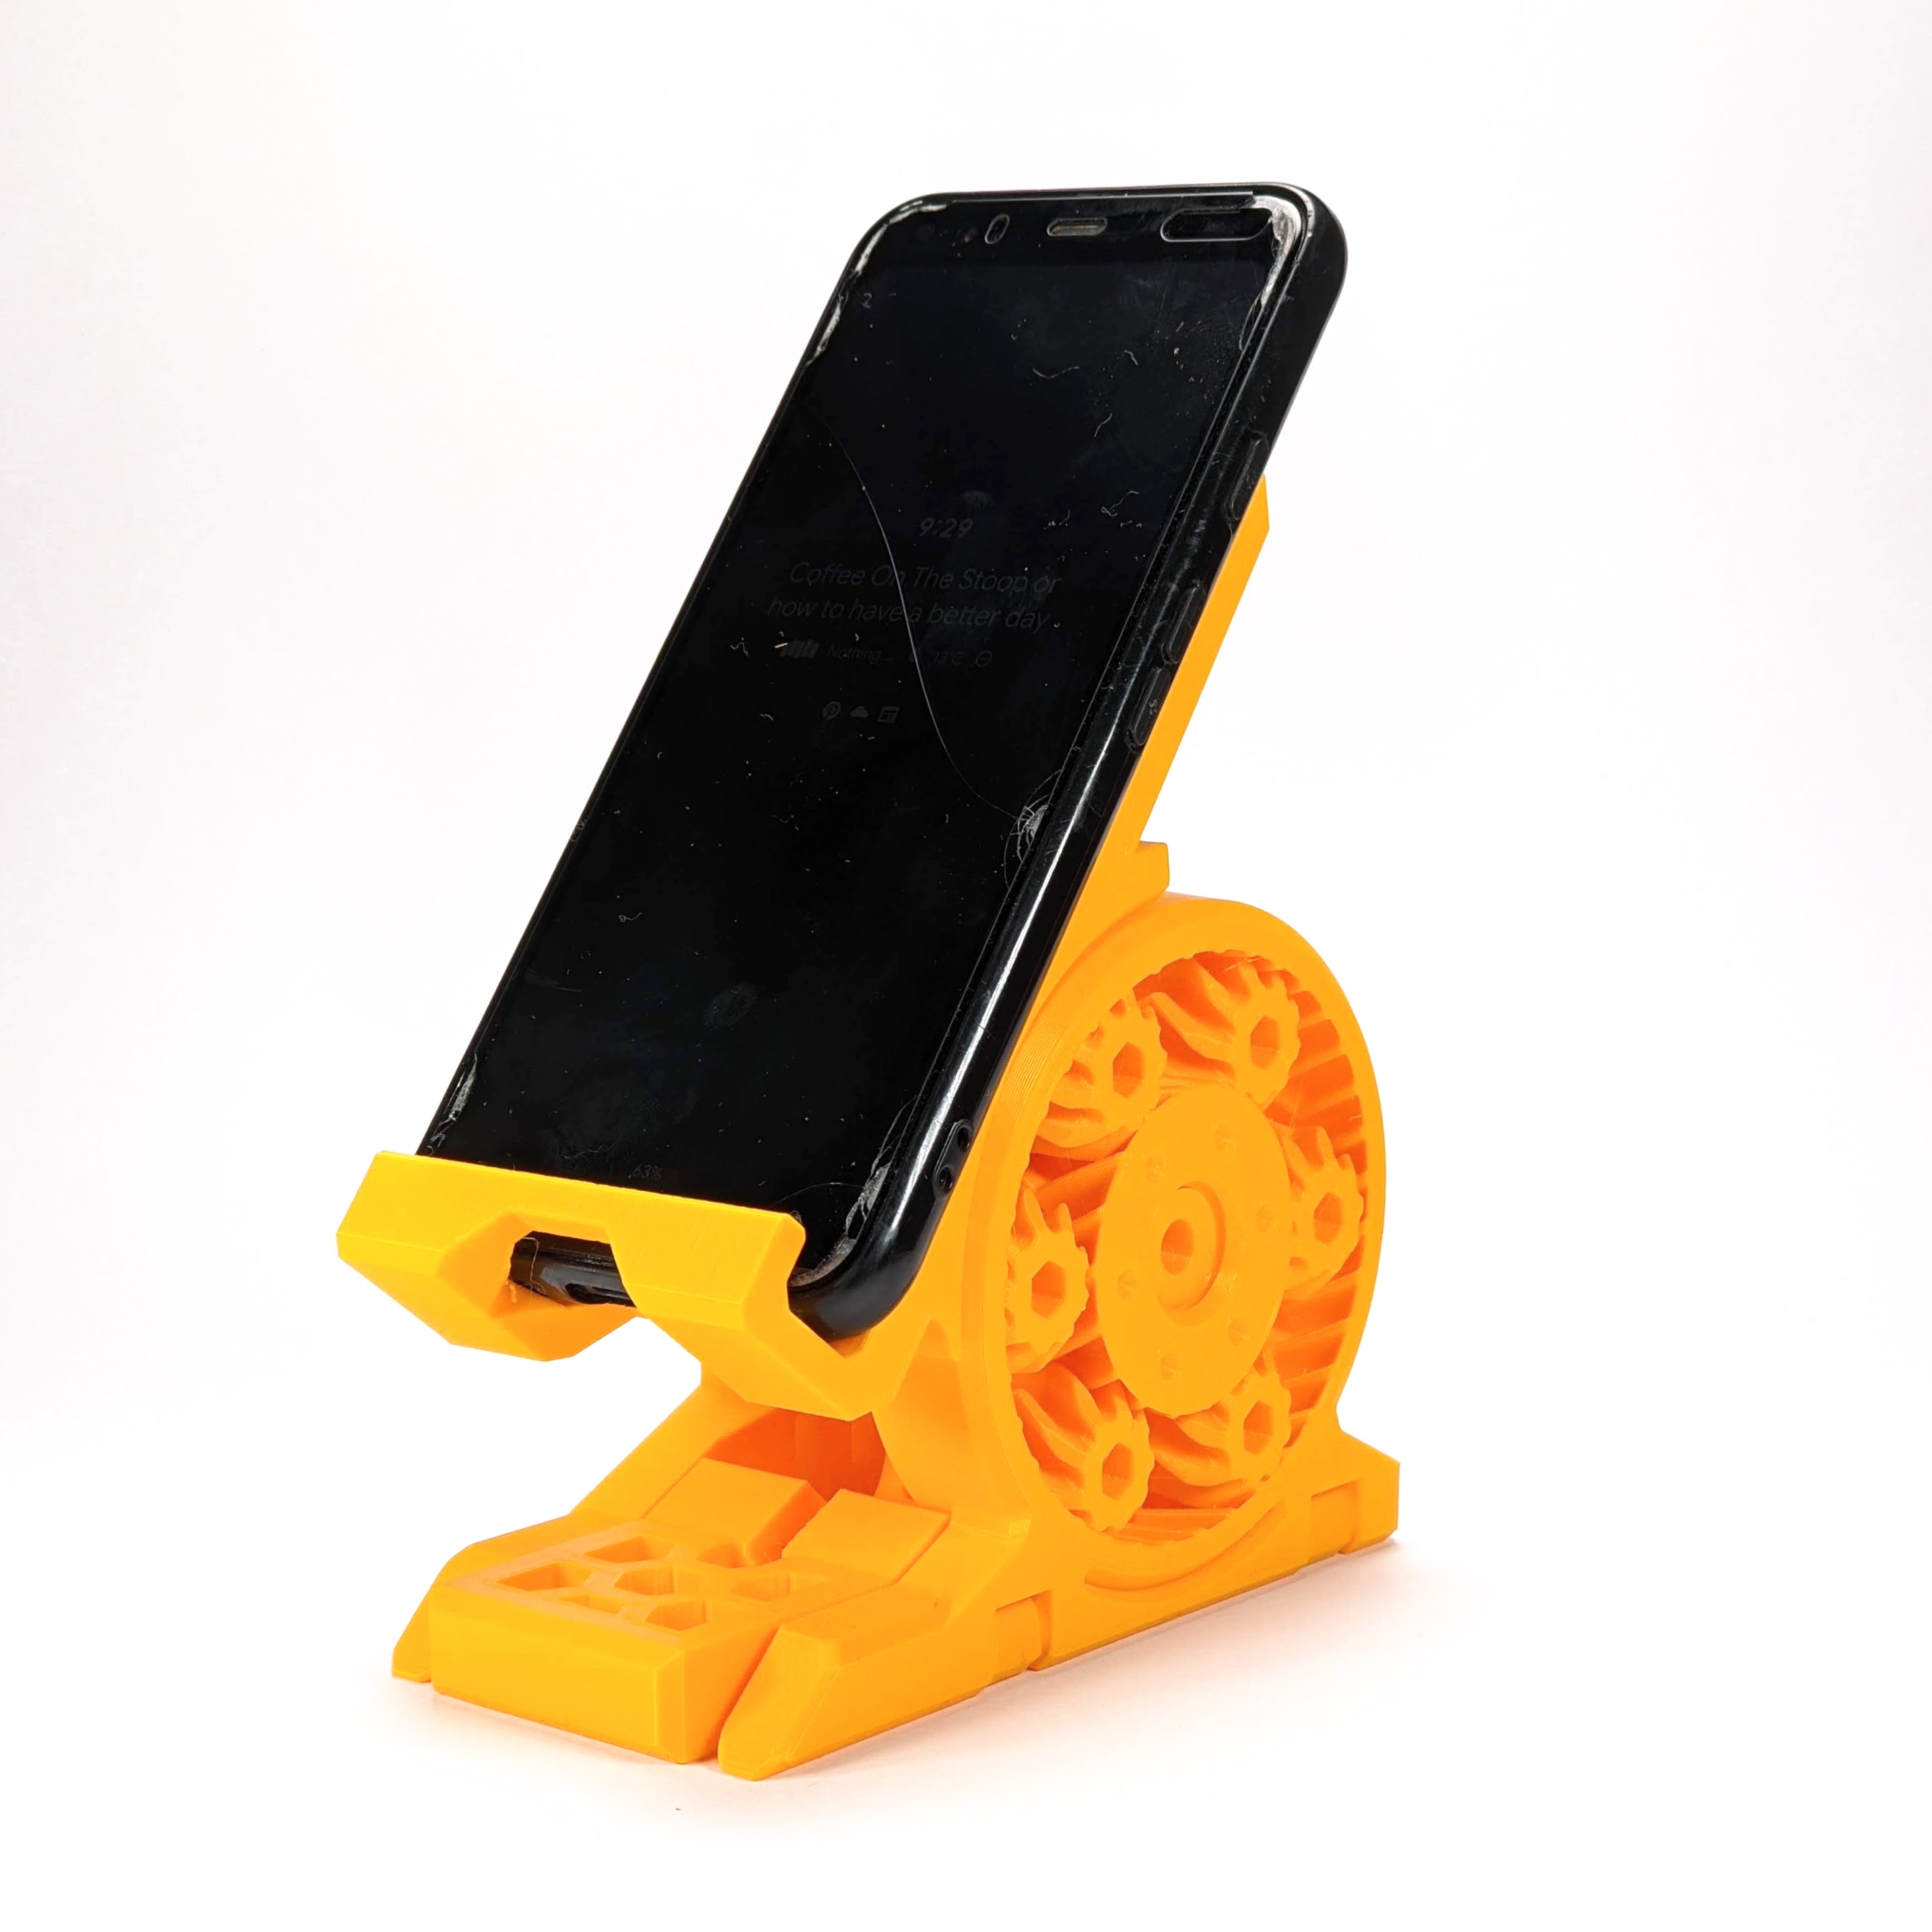 3D Printable Girder Phone Stand (with MagSafe option!) - now with  adjustable shelf! by Clockspring